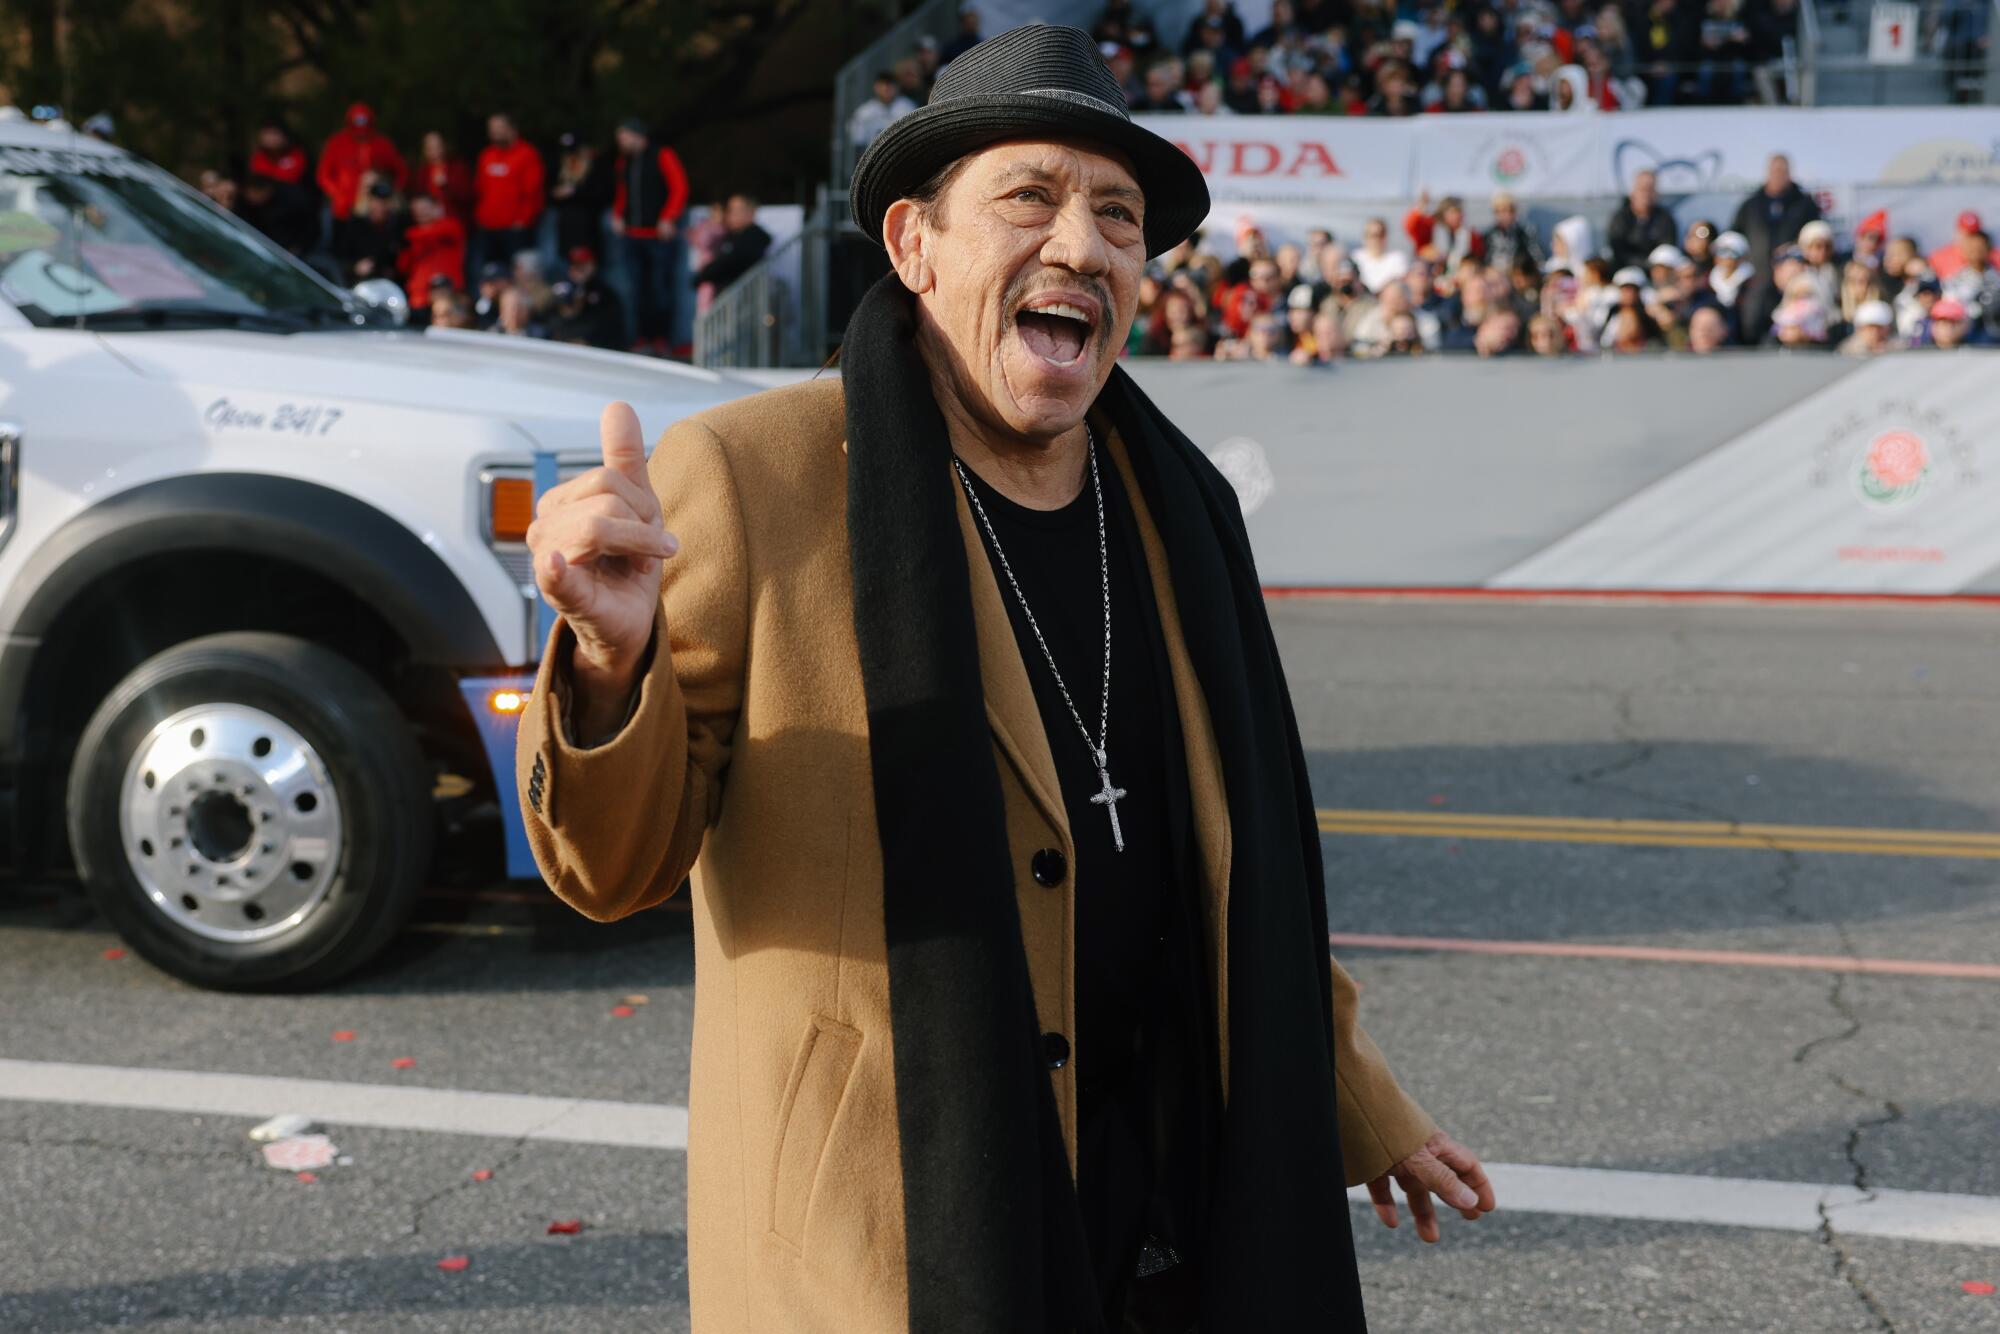 Danny Trejo walks the parade route at the Rose Parade.